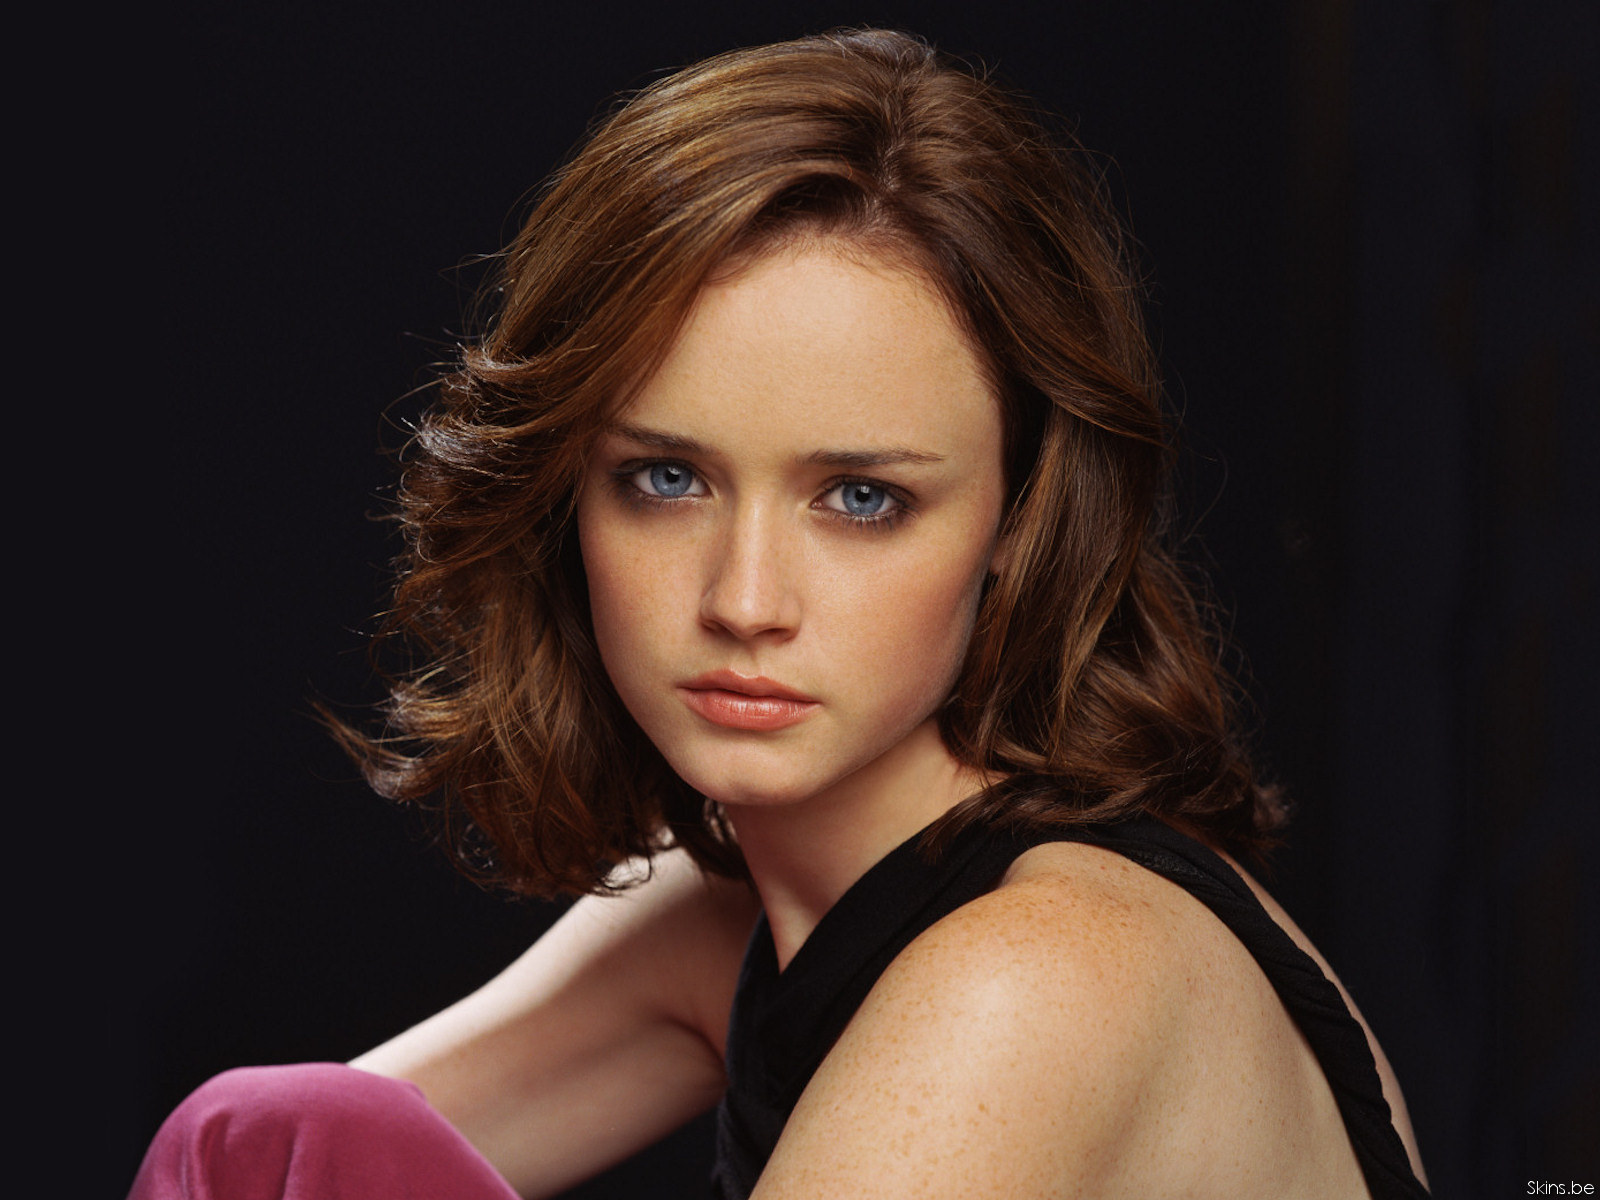 Need Actors and Actresses for your stories? Look through these! :) - Alexis Bledel - Page 1 - Wattpad